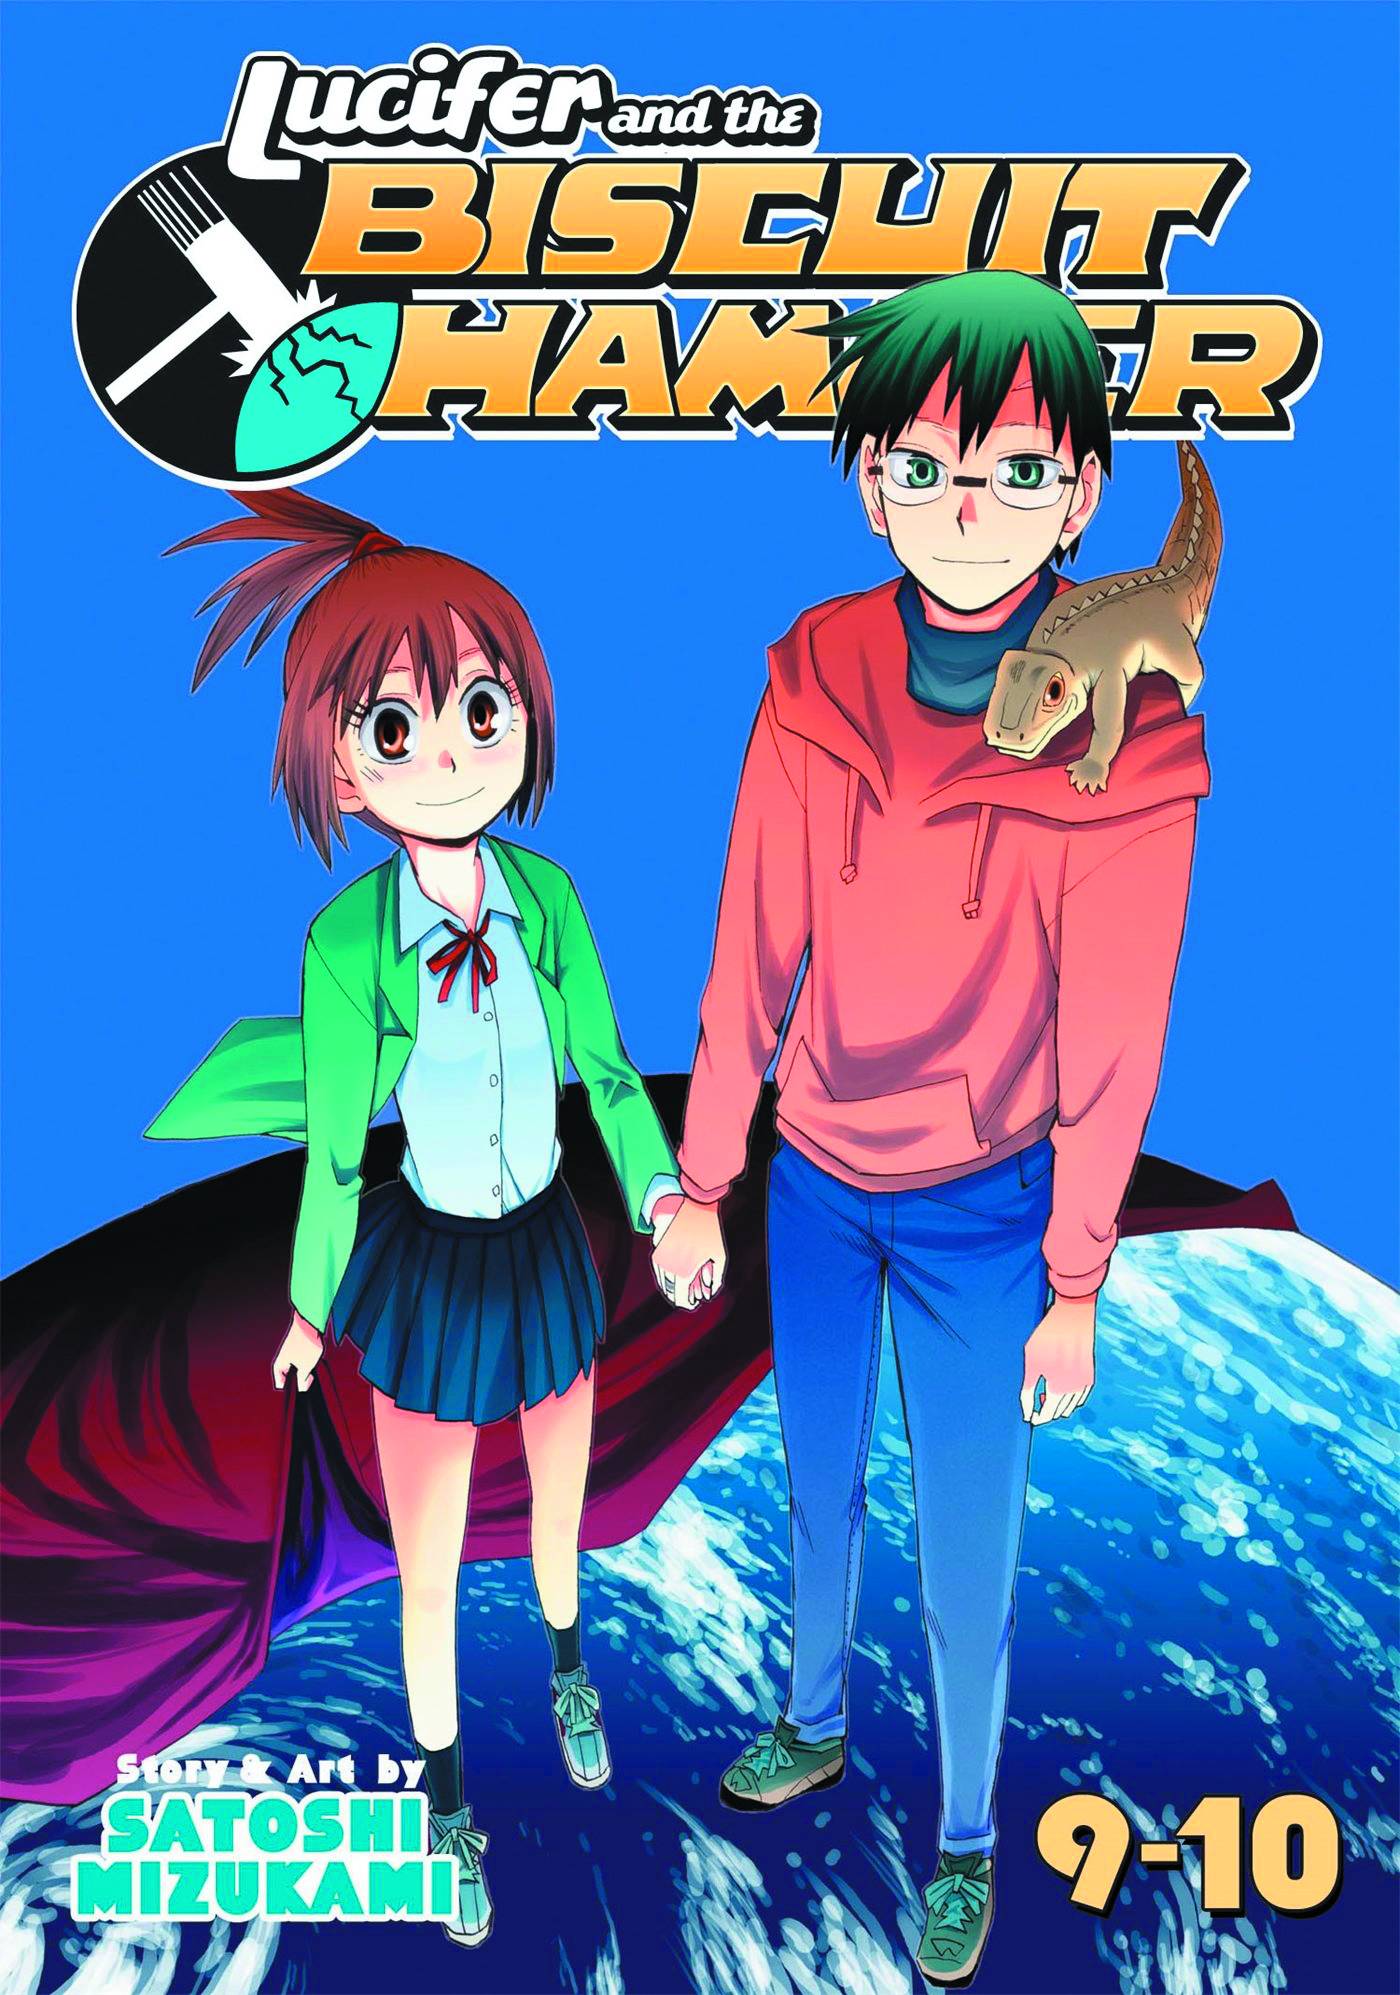 Lucifer and the Biscuit Hammer Manga Volume 5